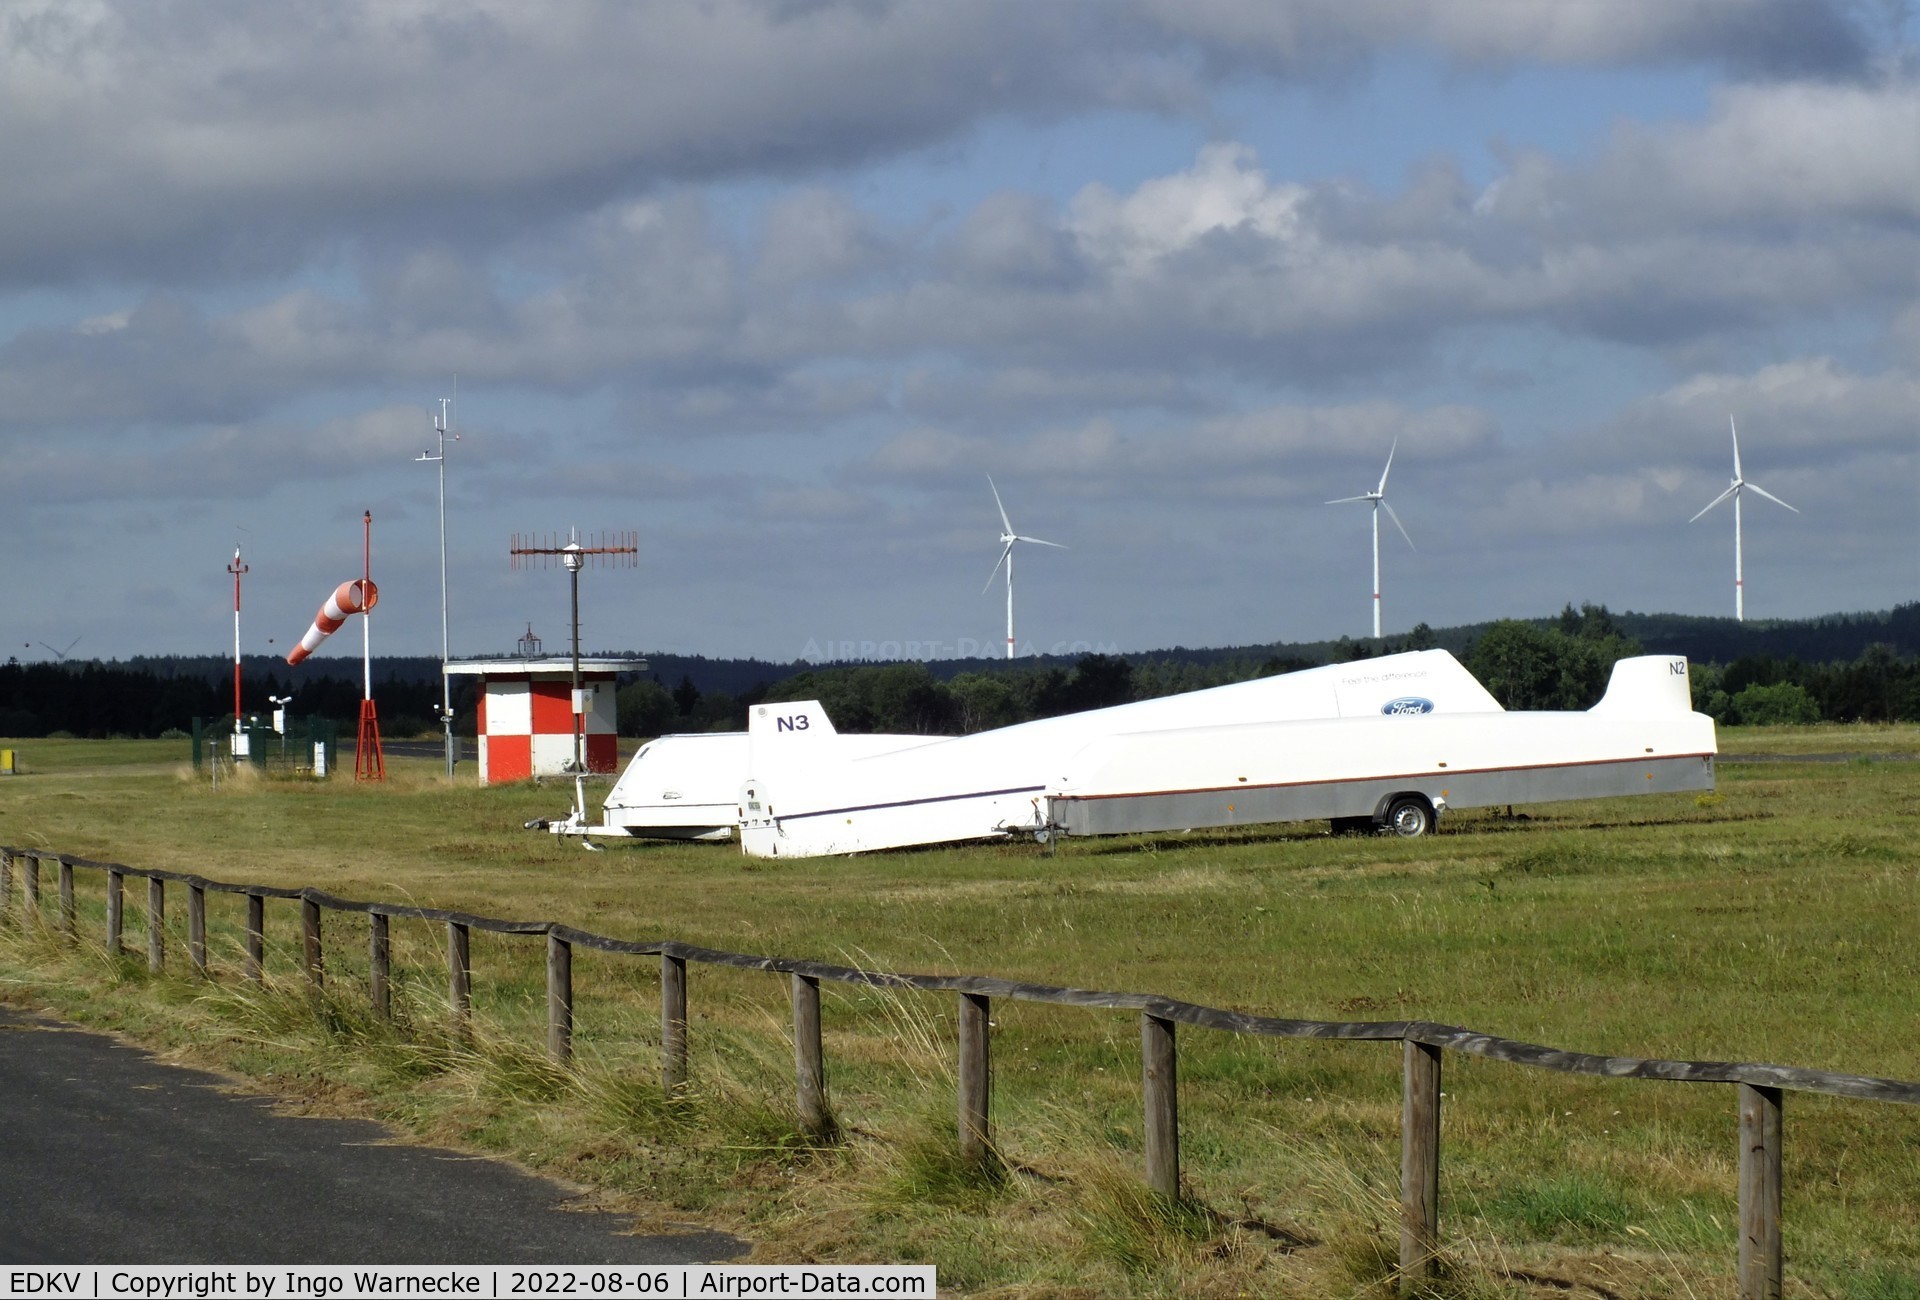 Dahlemer Binz Airport, Dahlem Germany (EDKV) - gliders parked at Dahlemer Binz airfield